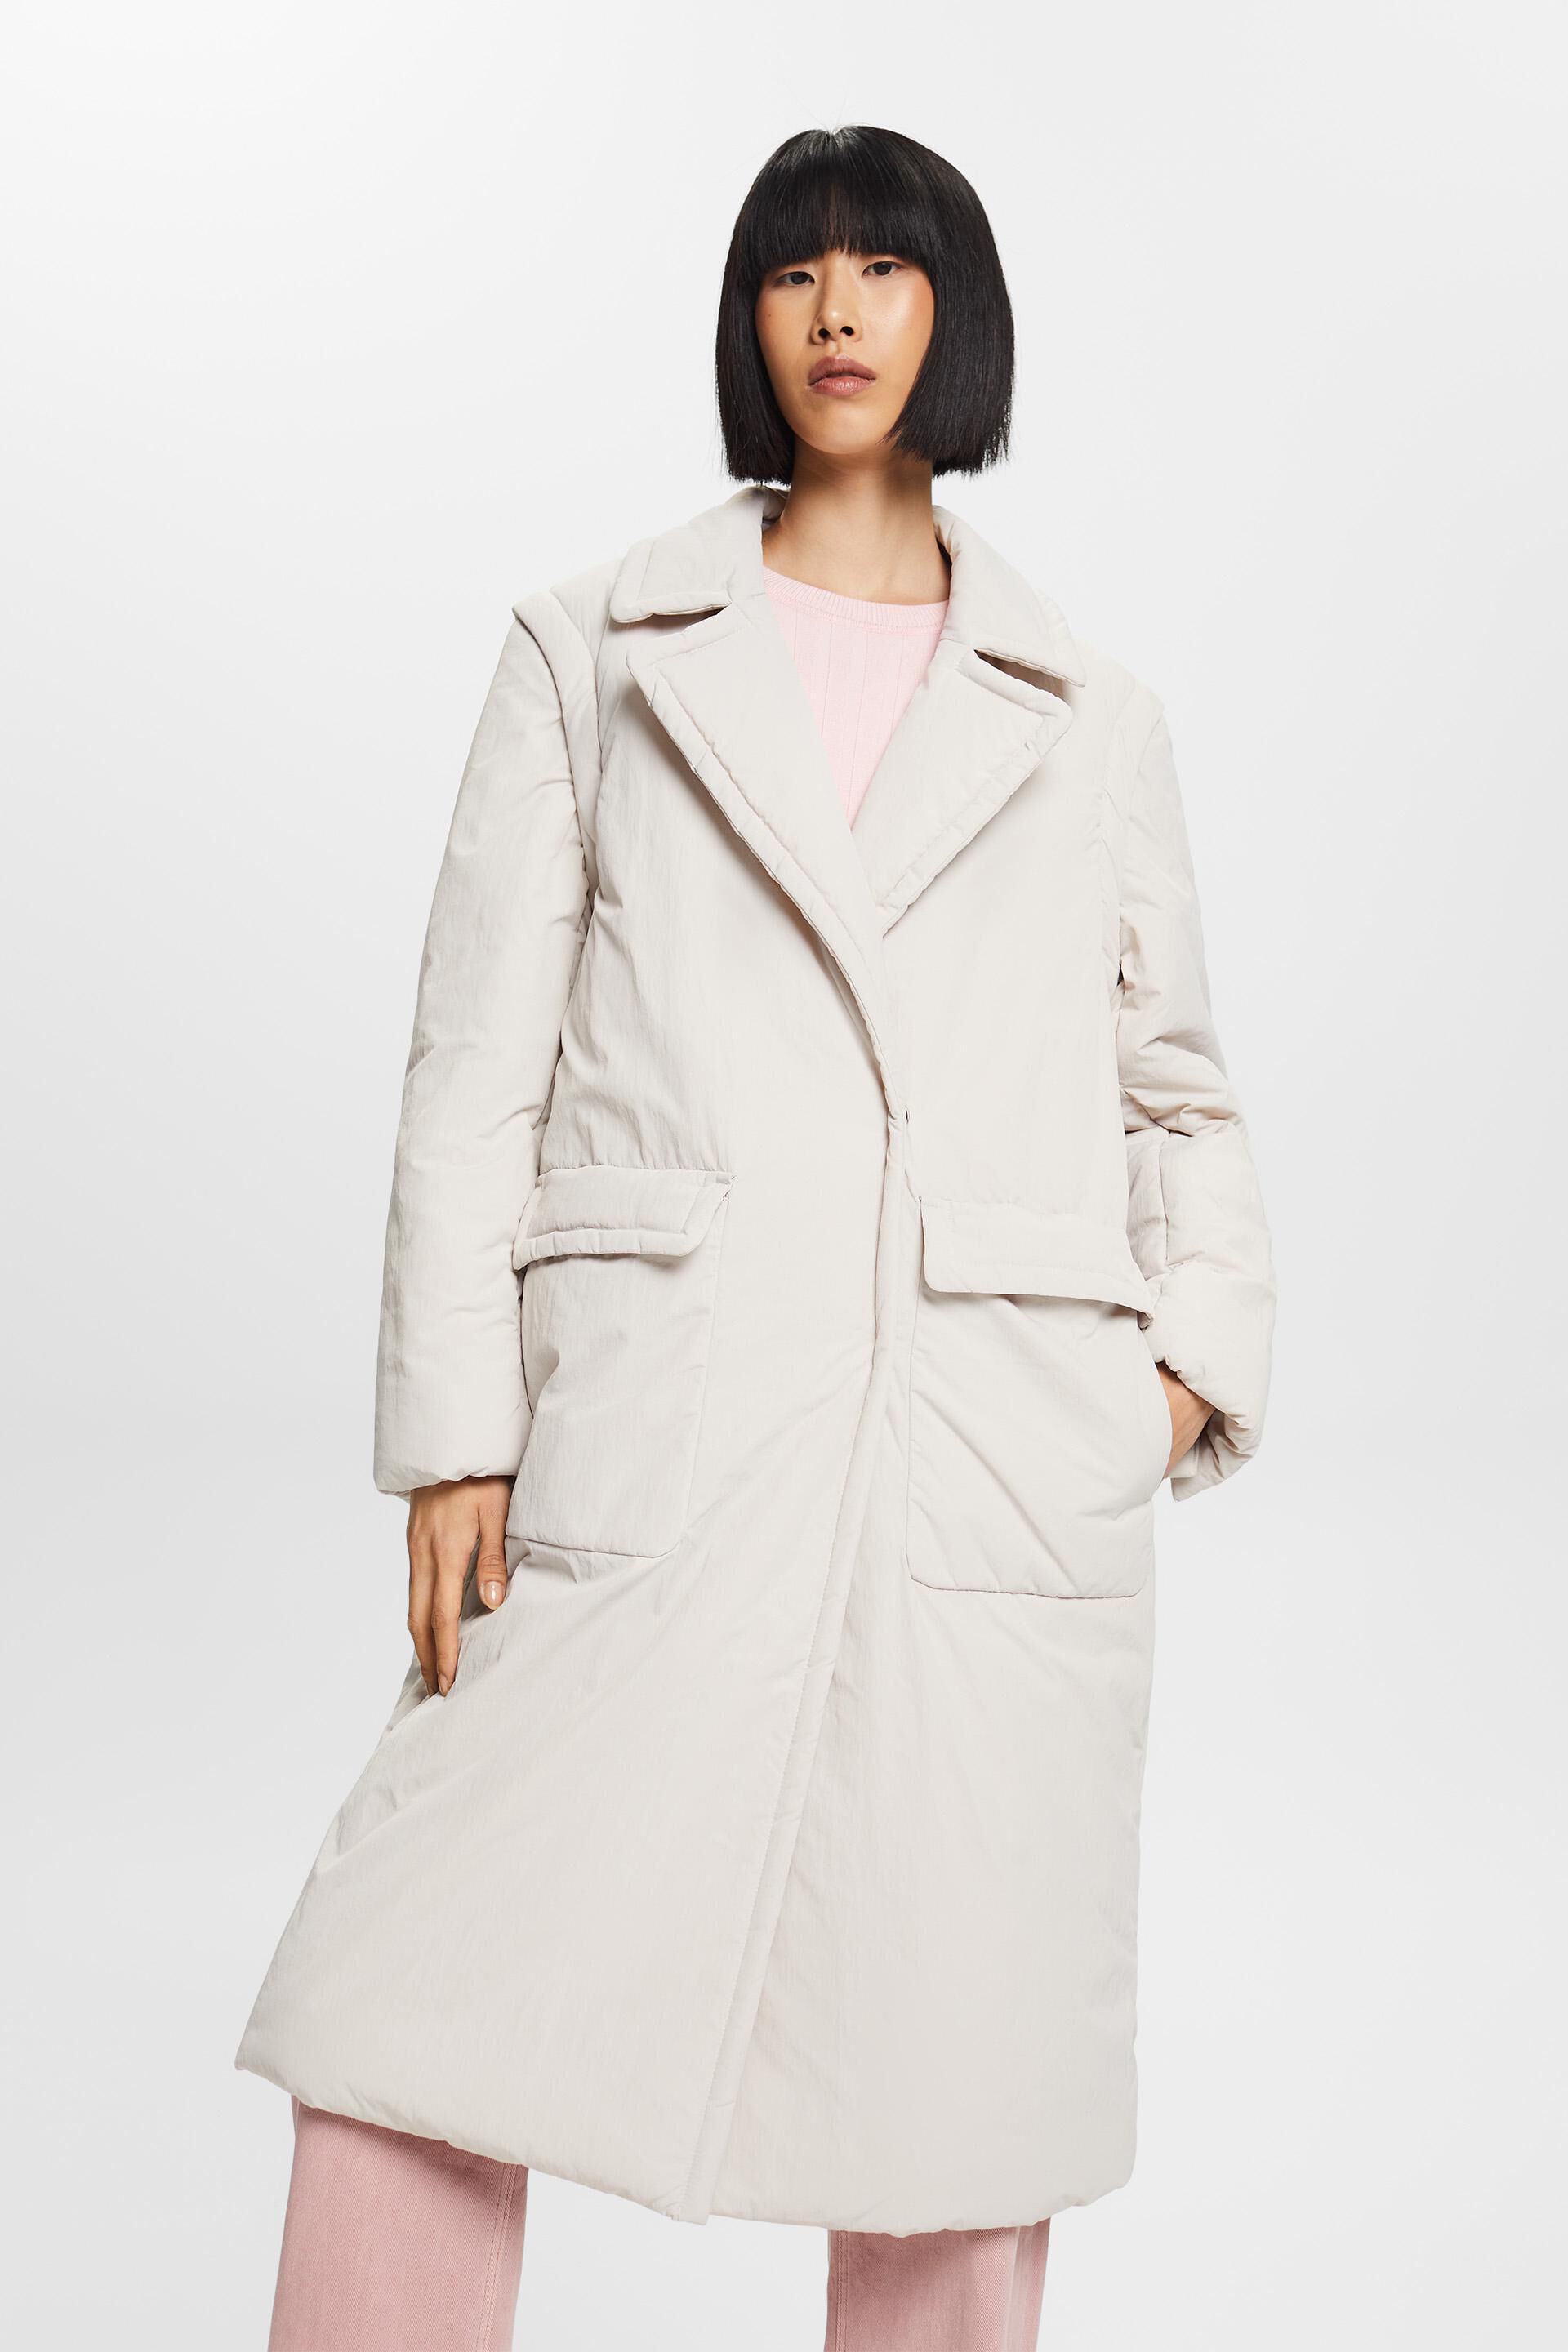 Esprit detachable coat 2-in-1 with padded sleeves